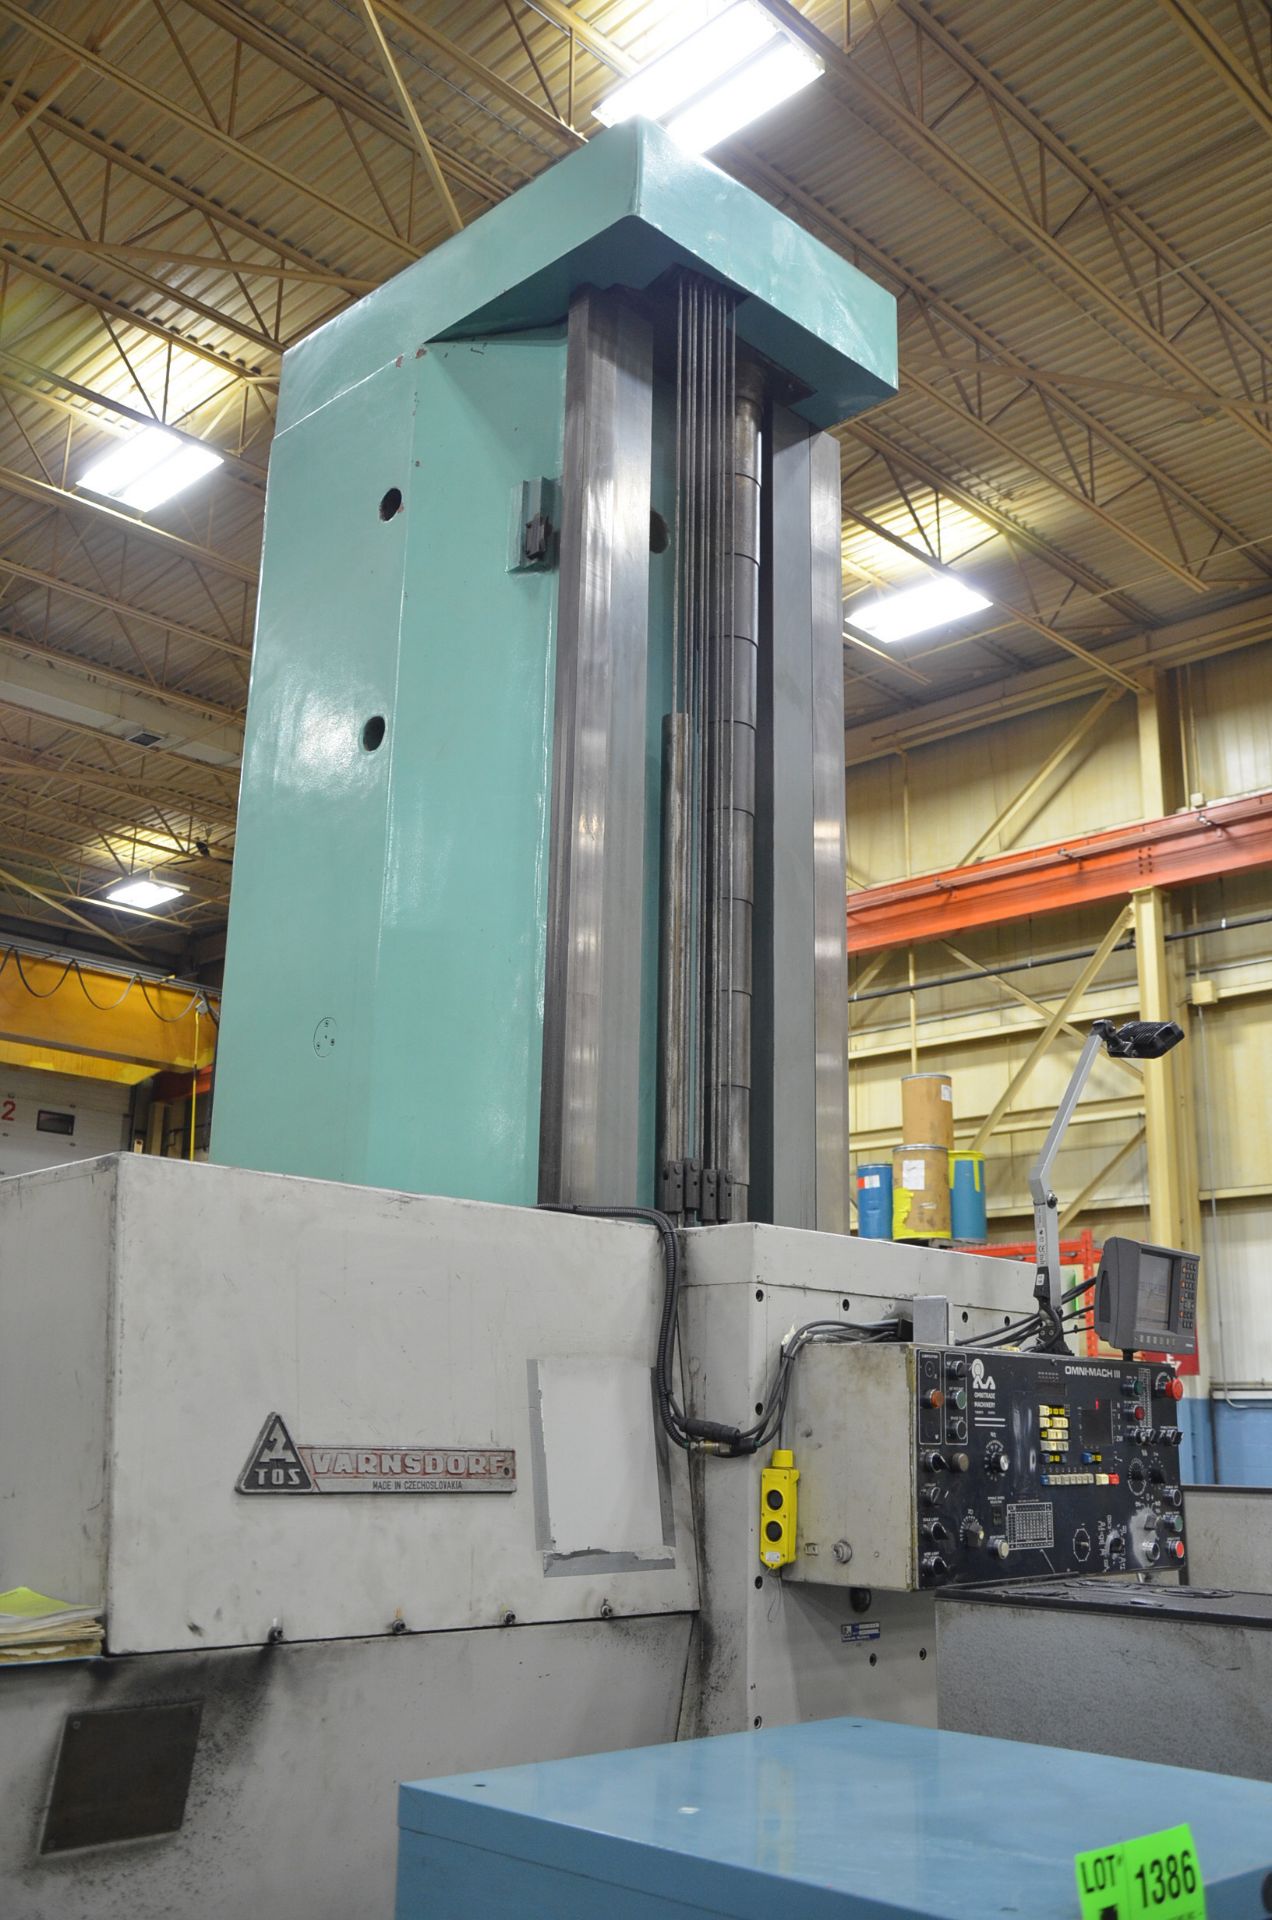 TOS WHN-13-4-A TABLE-TYPE HORIZONTAL BORING MILL WITH 5" SPINDLE, 63"X70.5" T-SLOT ROTARY TABLE, - Image 8 of 10